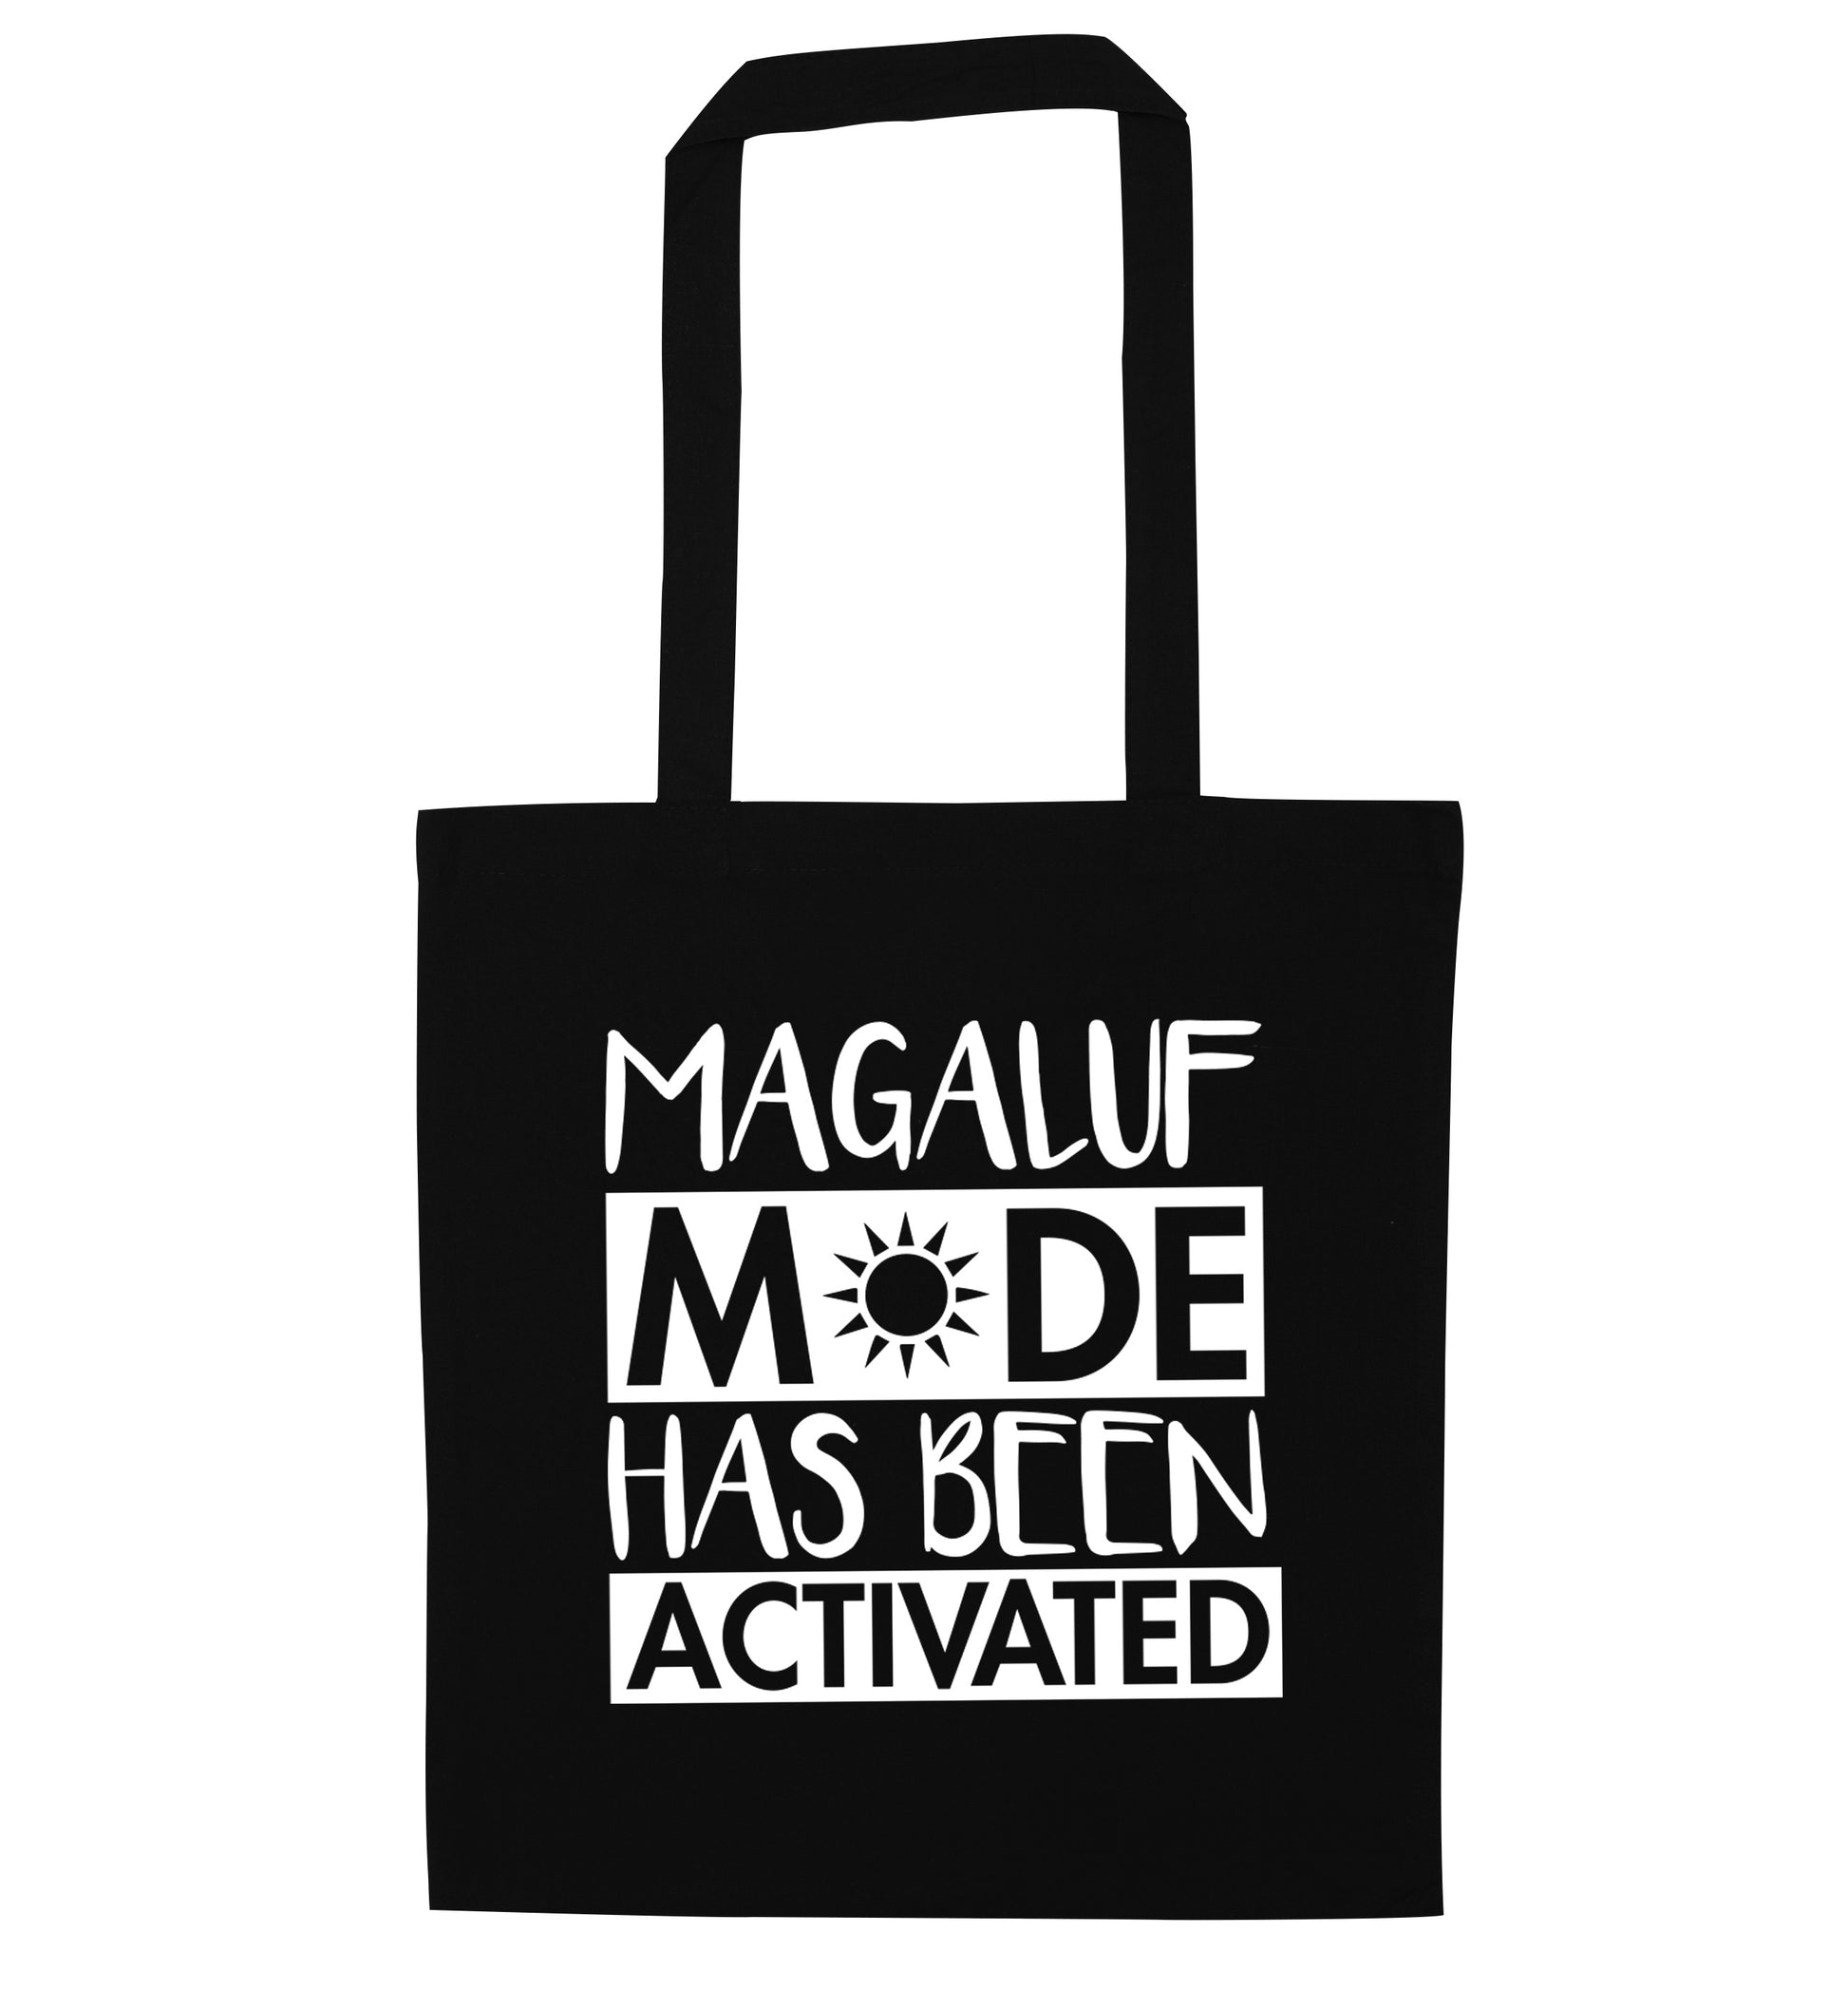 Magaluf mode has been activated black tote bag